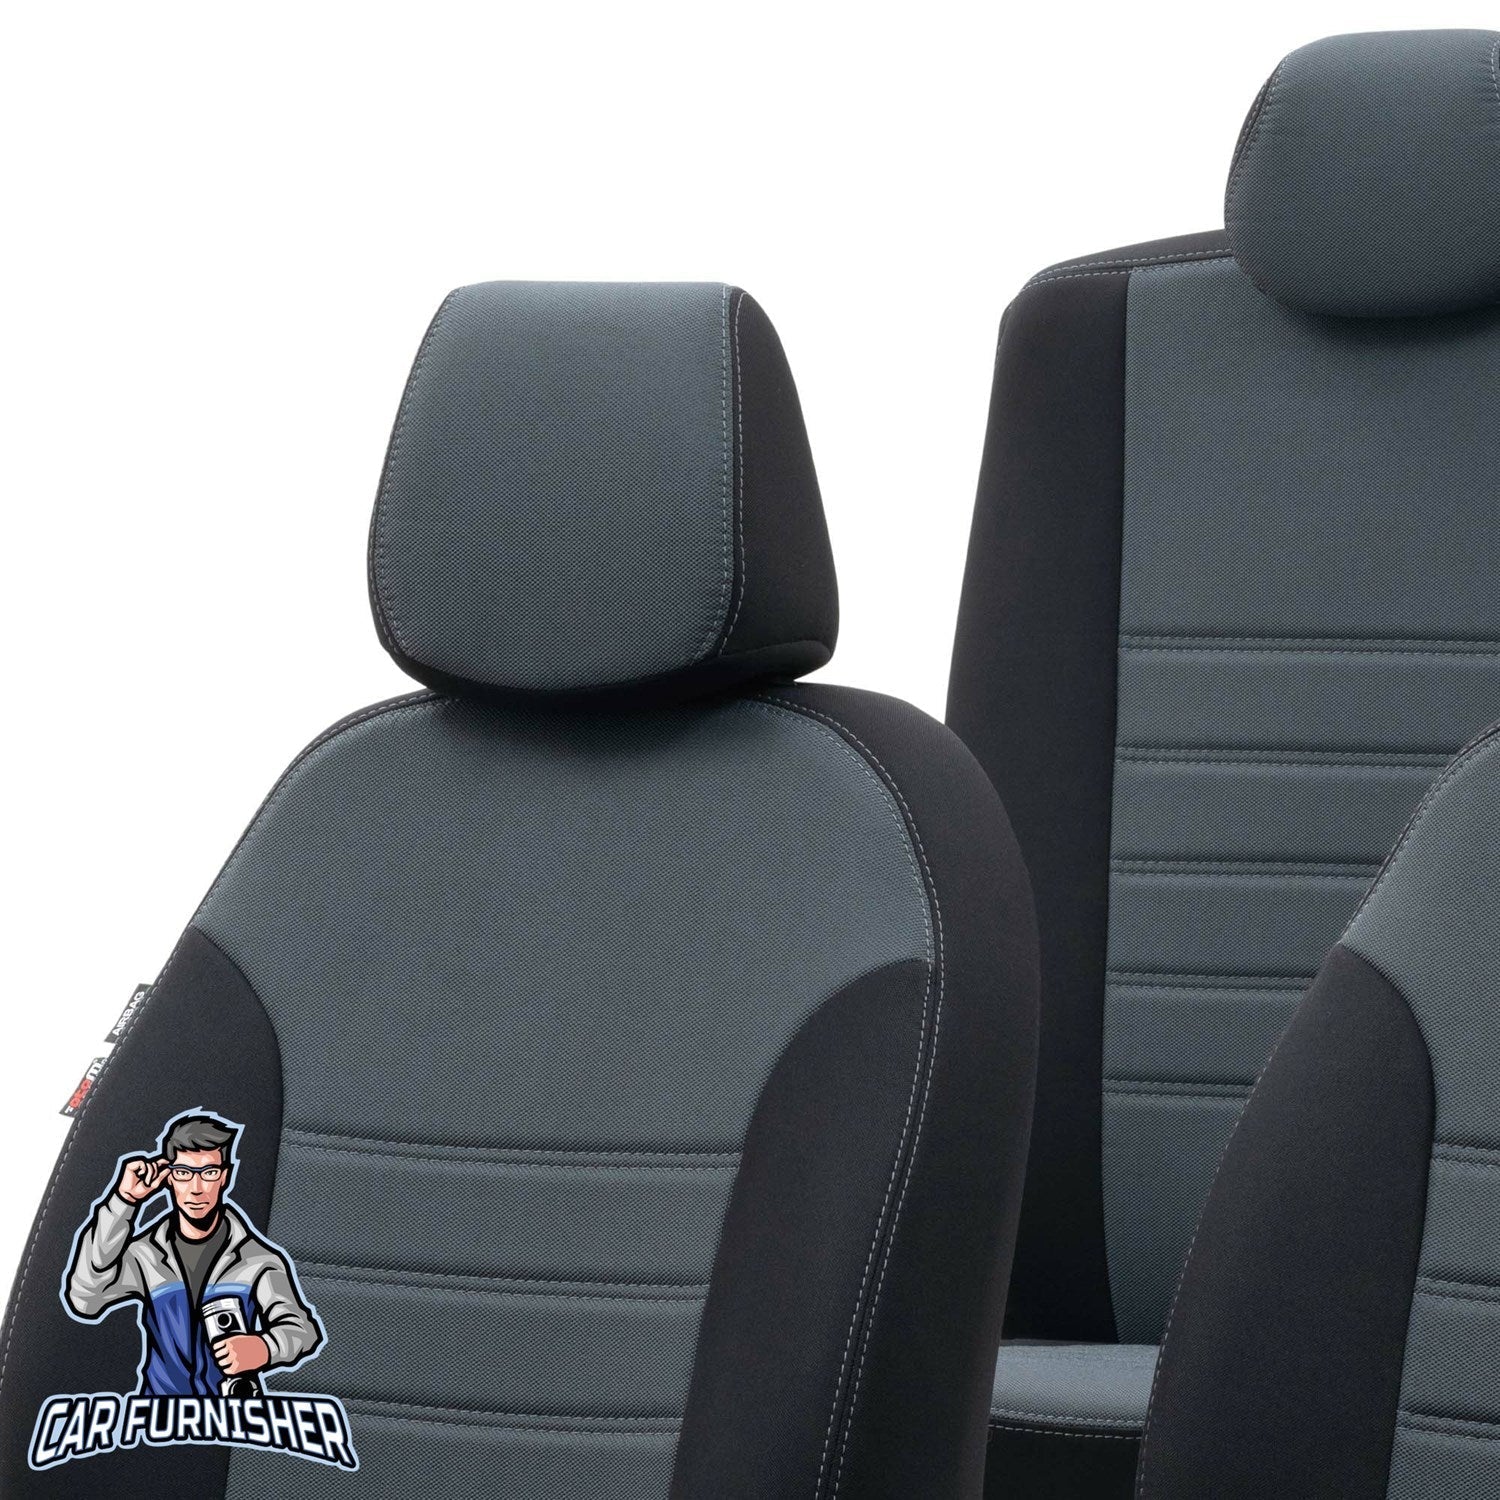 Nissan NV300 Seat Cover New York Leather Design Smoked Black Jacquard Fabric